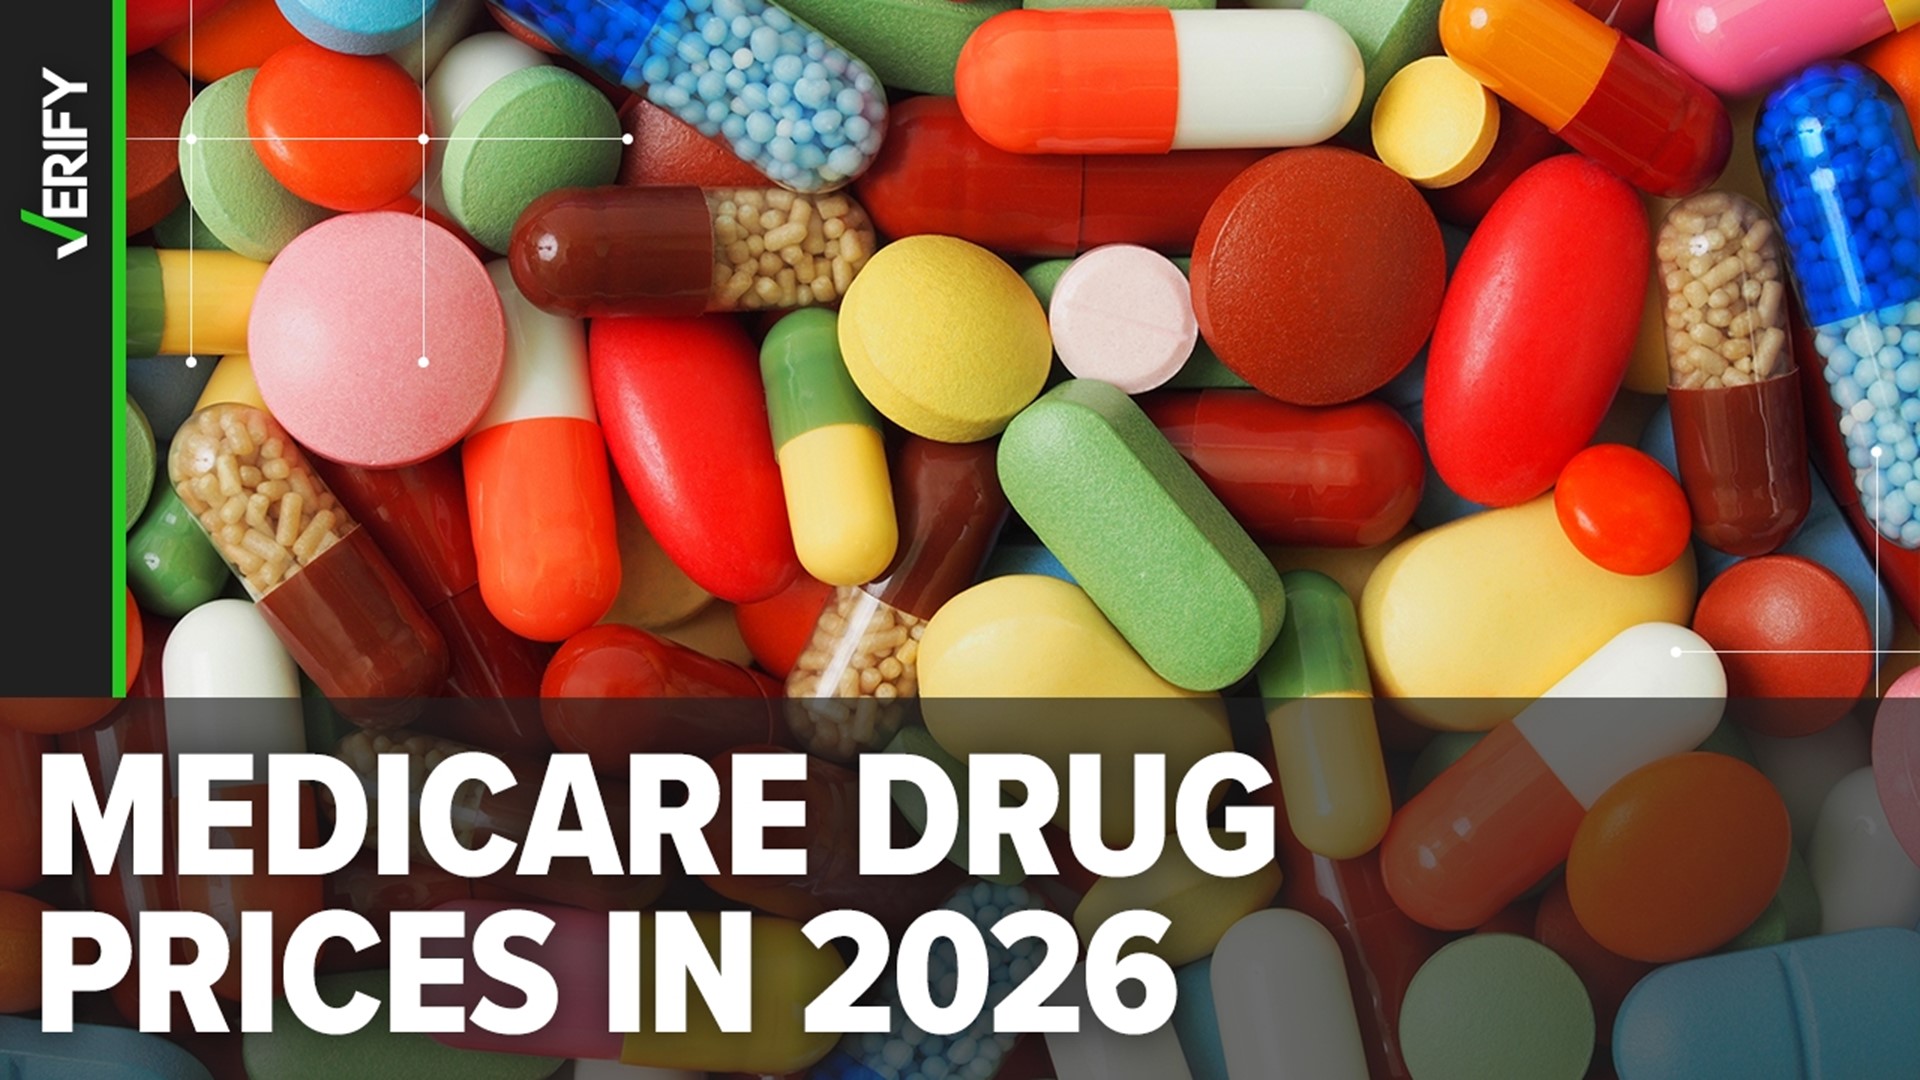 The first 10 drugs selected for Medicare price negotiation include Jardiance and Eliquis. But any lower prices aren’t set to take effect until 2026.